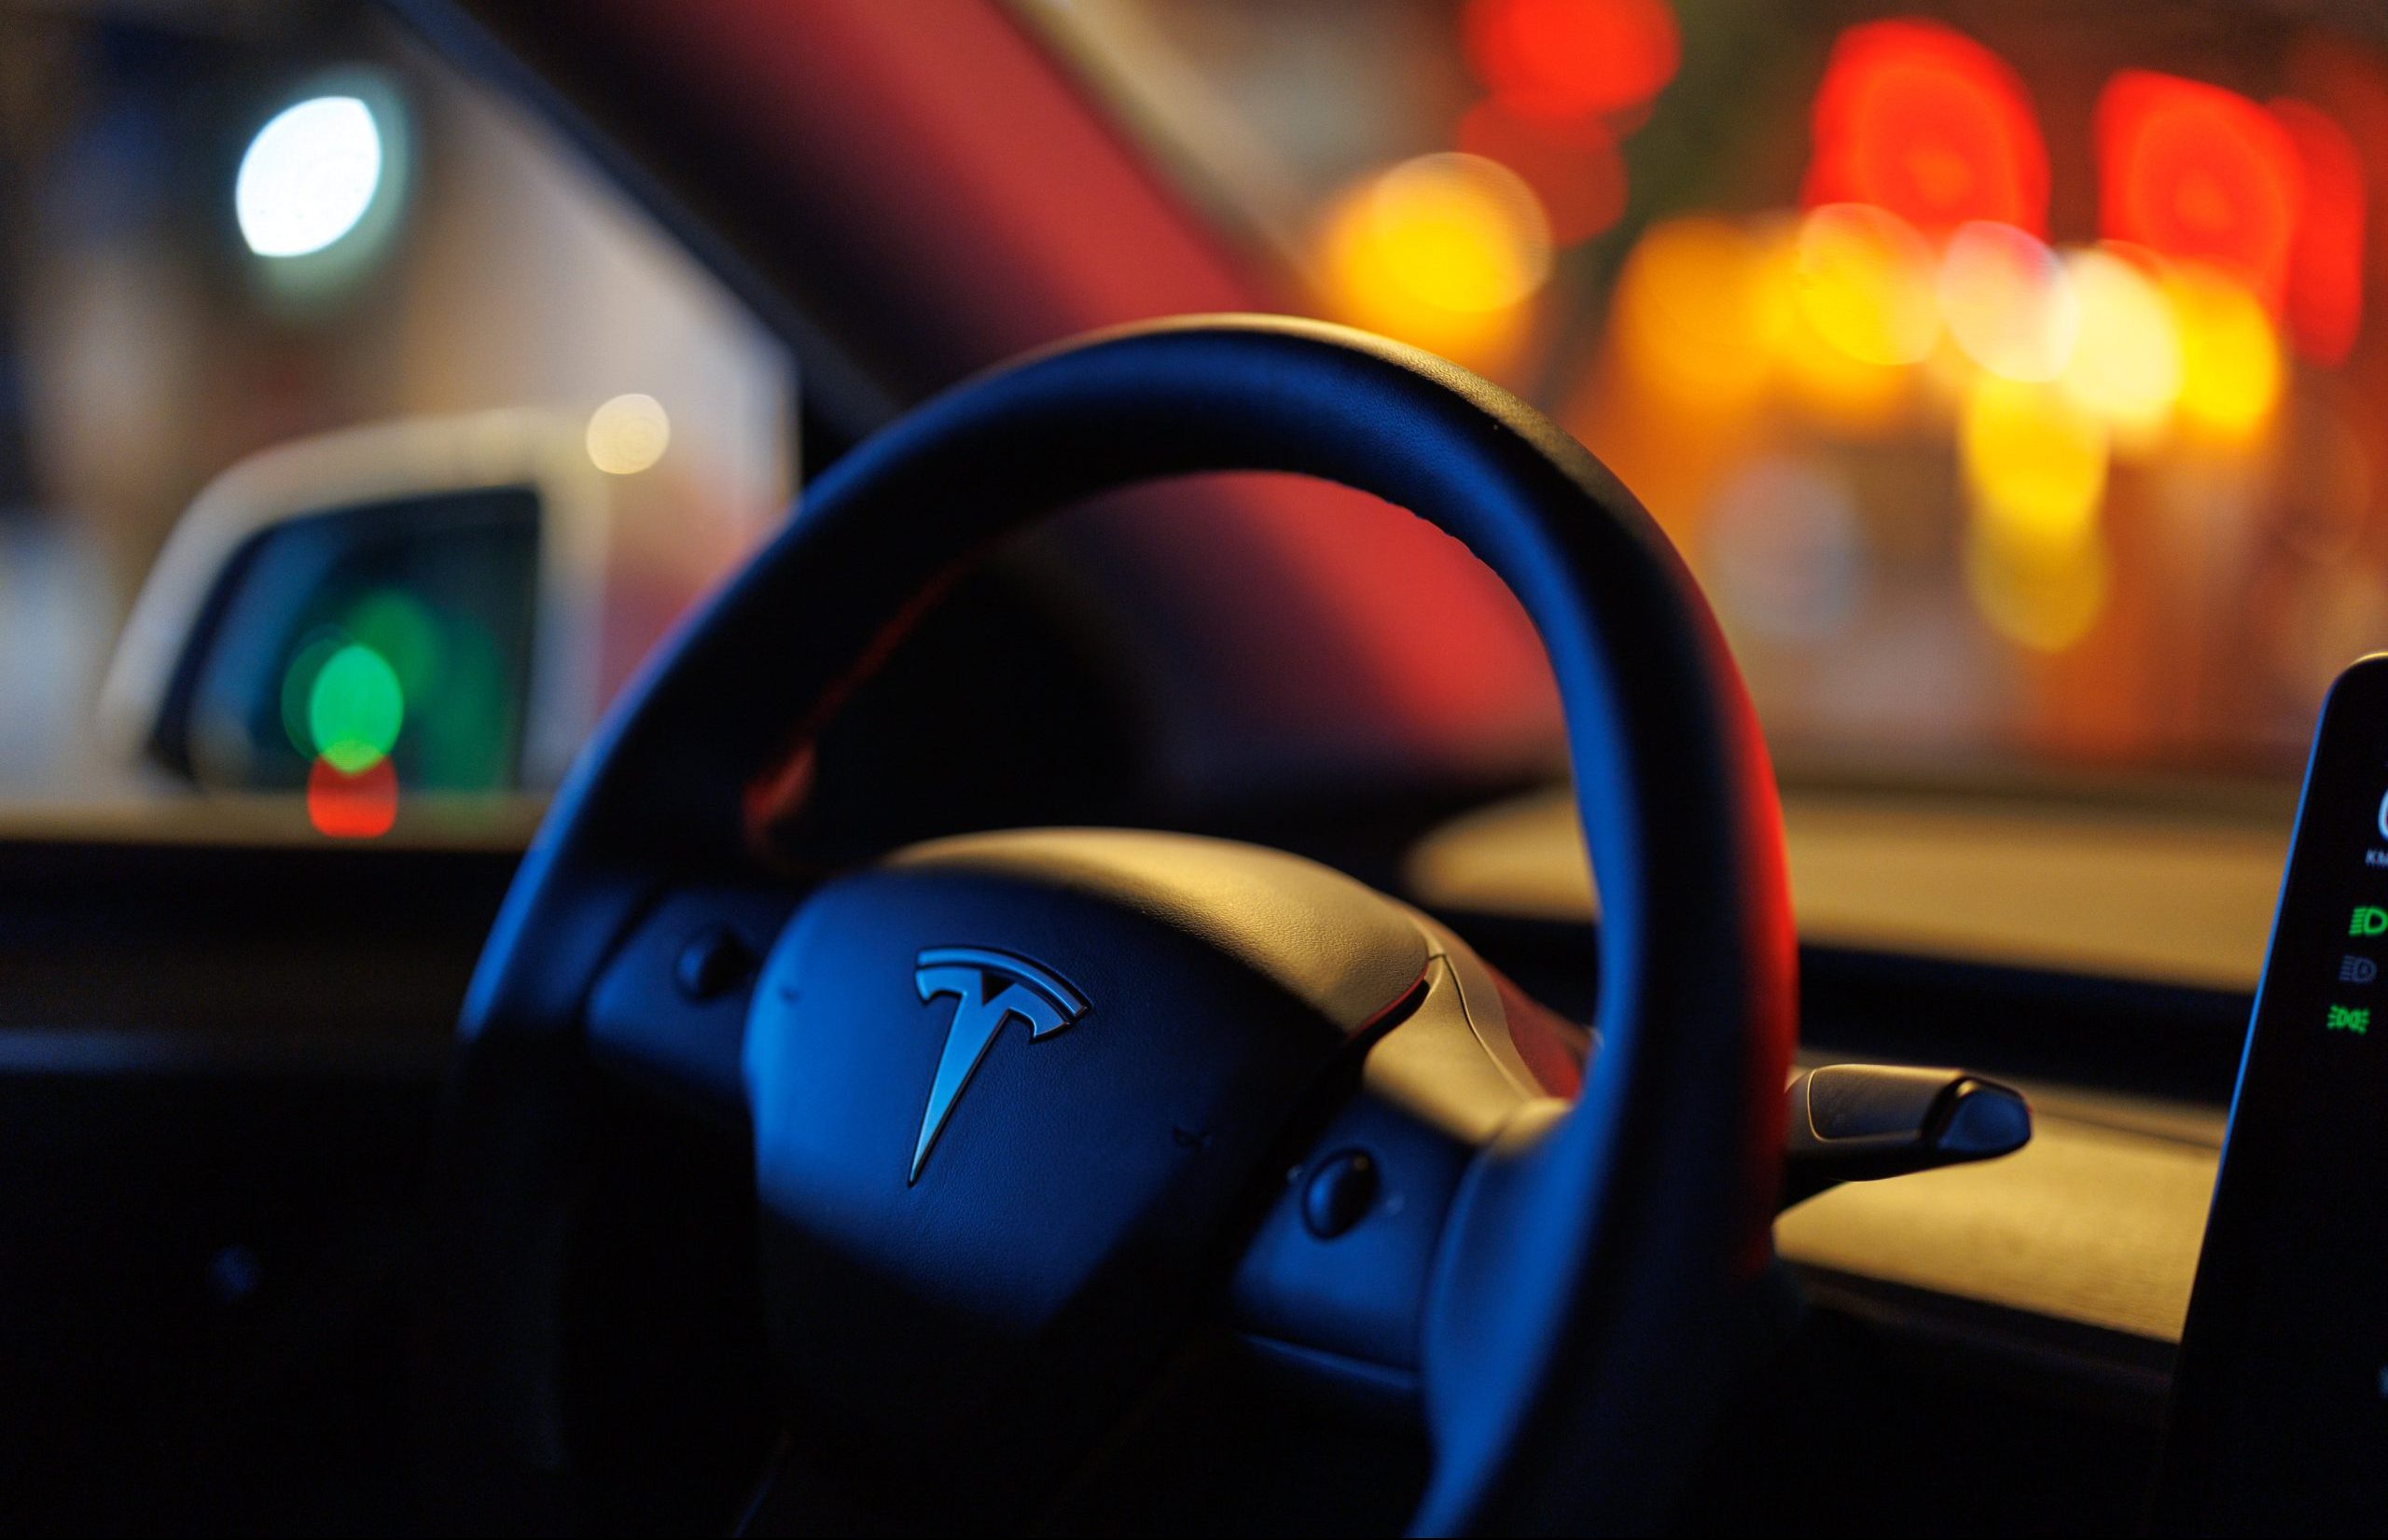 Tesla Driver Pleads Guilty to Dangerous Driving